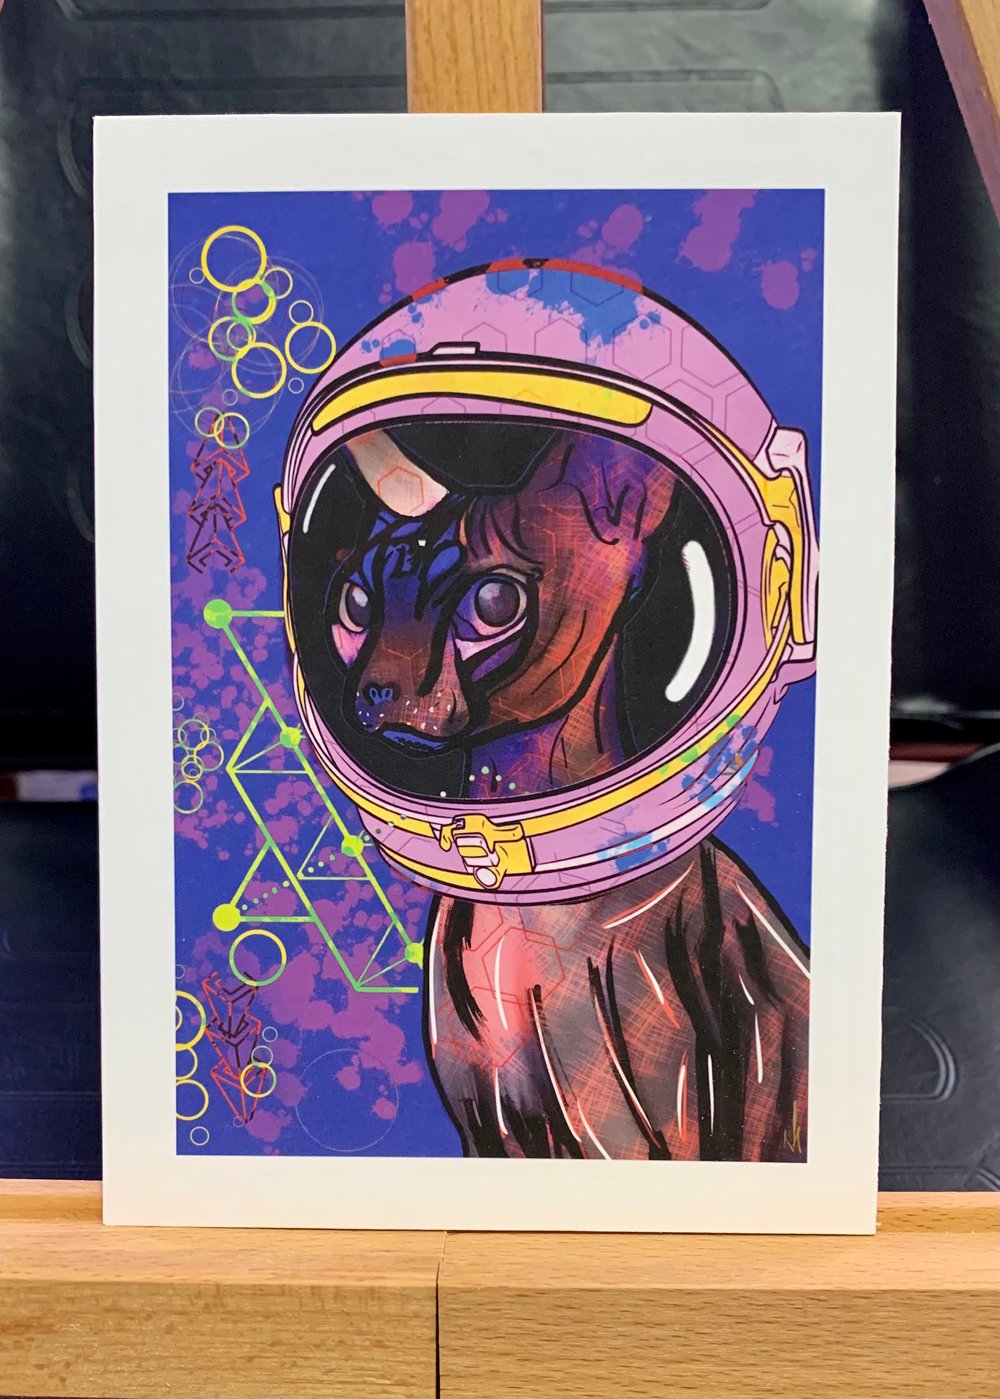 Space Cat 5x7 LE (Direct Shipped)